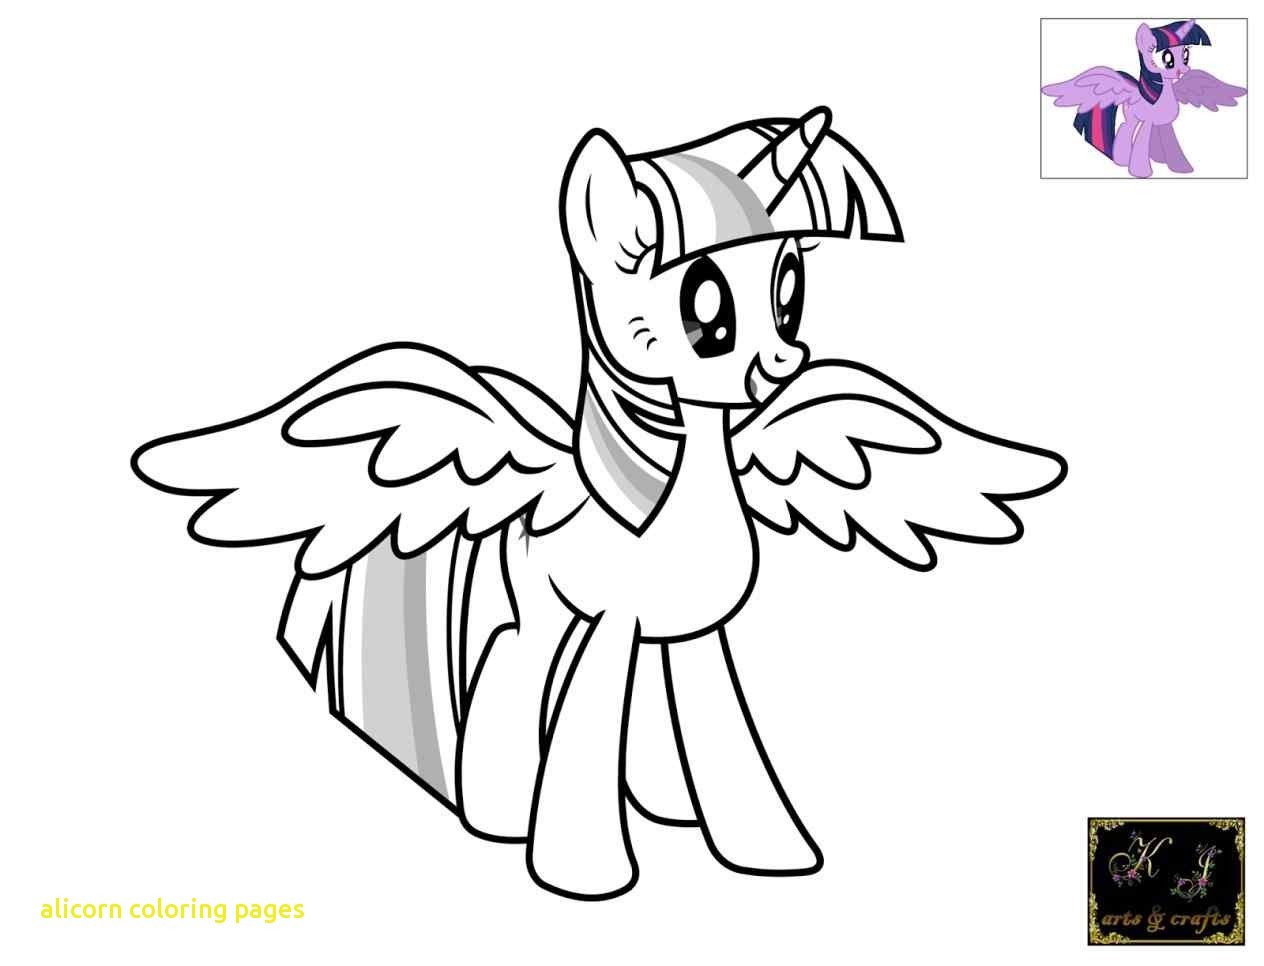 Twilight Sparkle with Wings Coloring Pages Sparkle Drawing at GetDrawings CLICK HERE Coloring Pages Detail